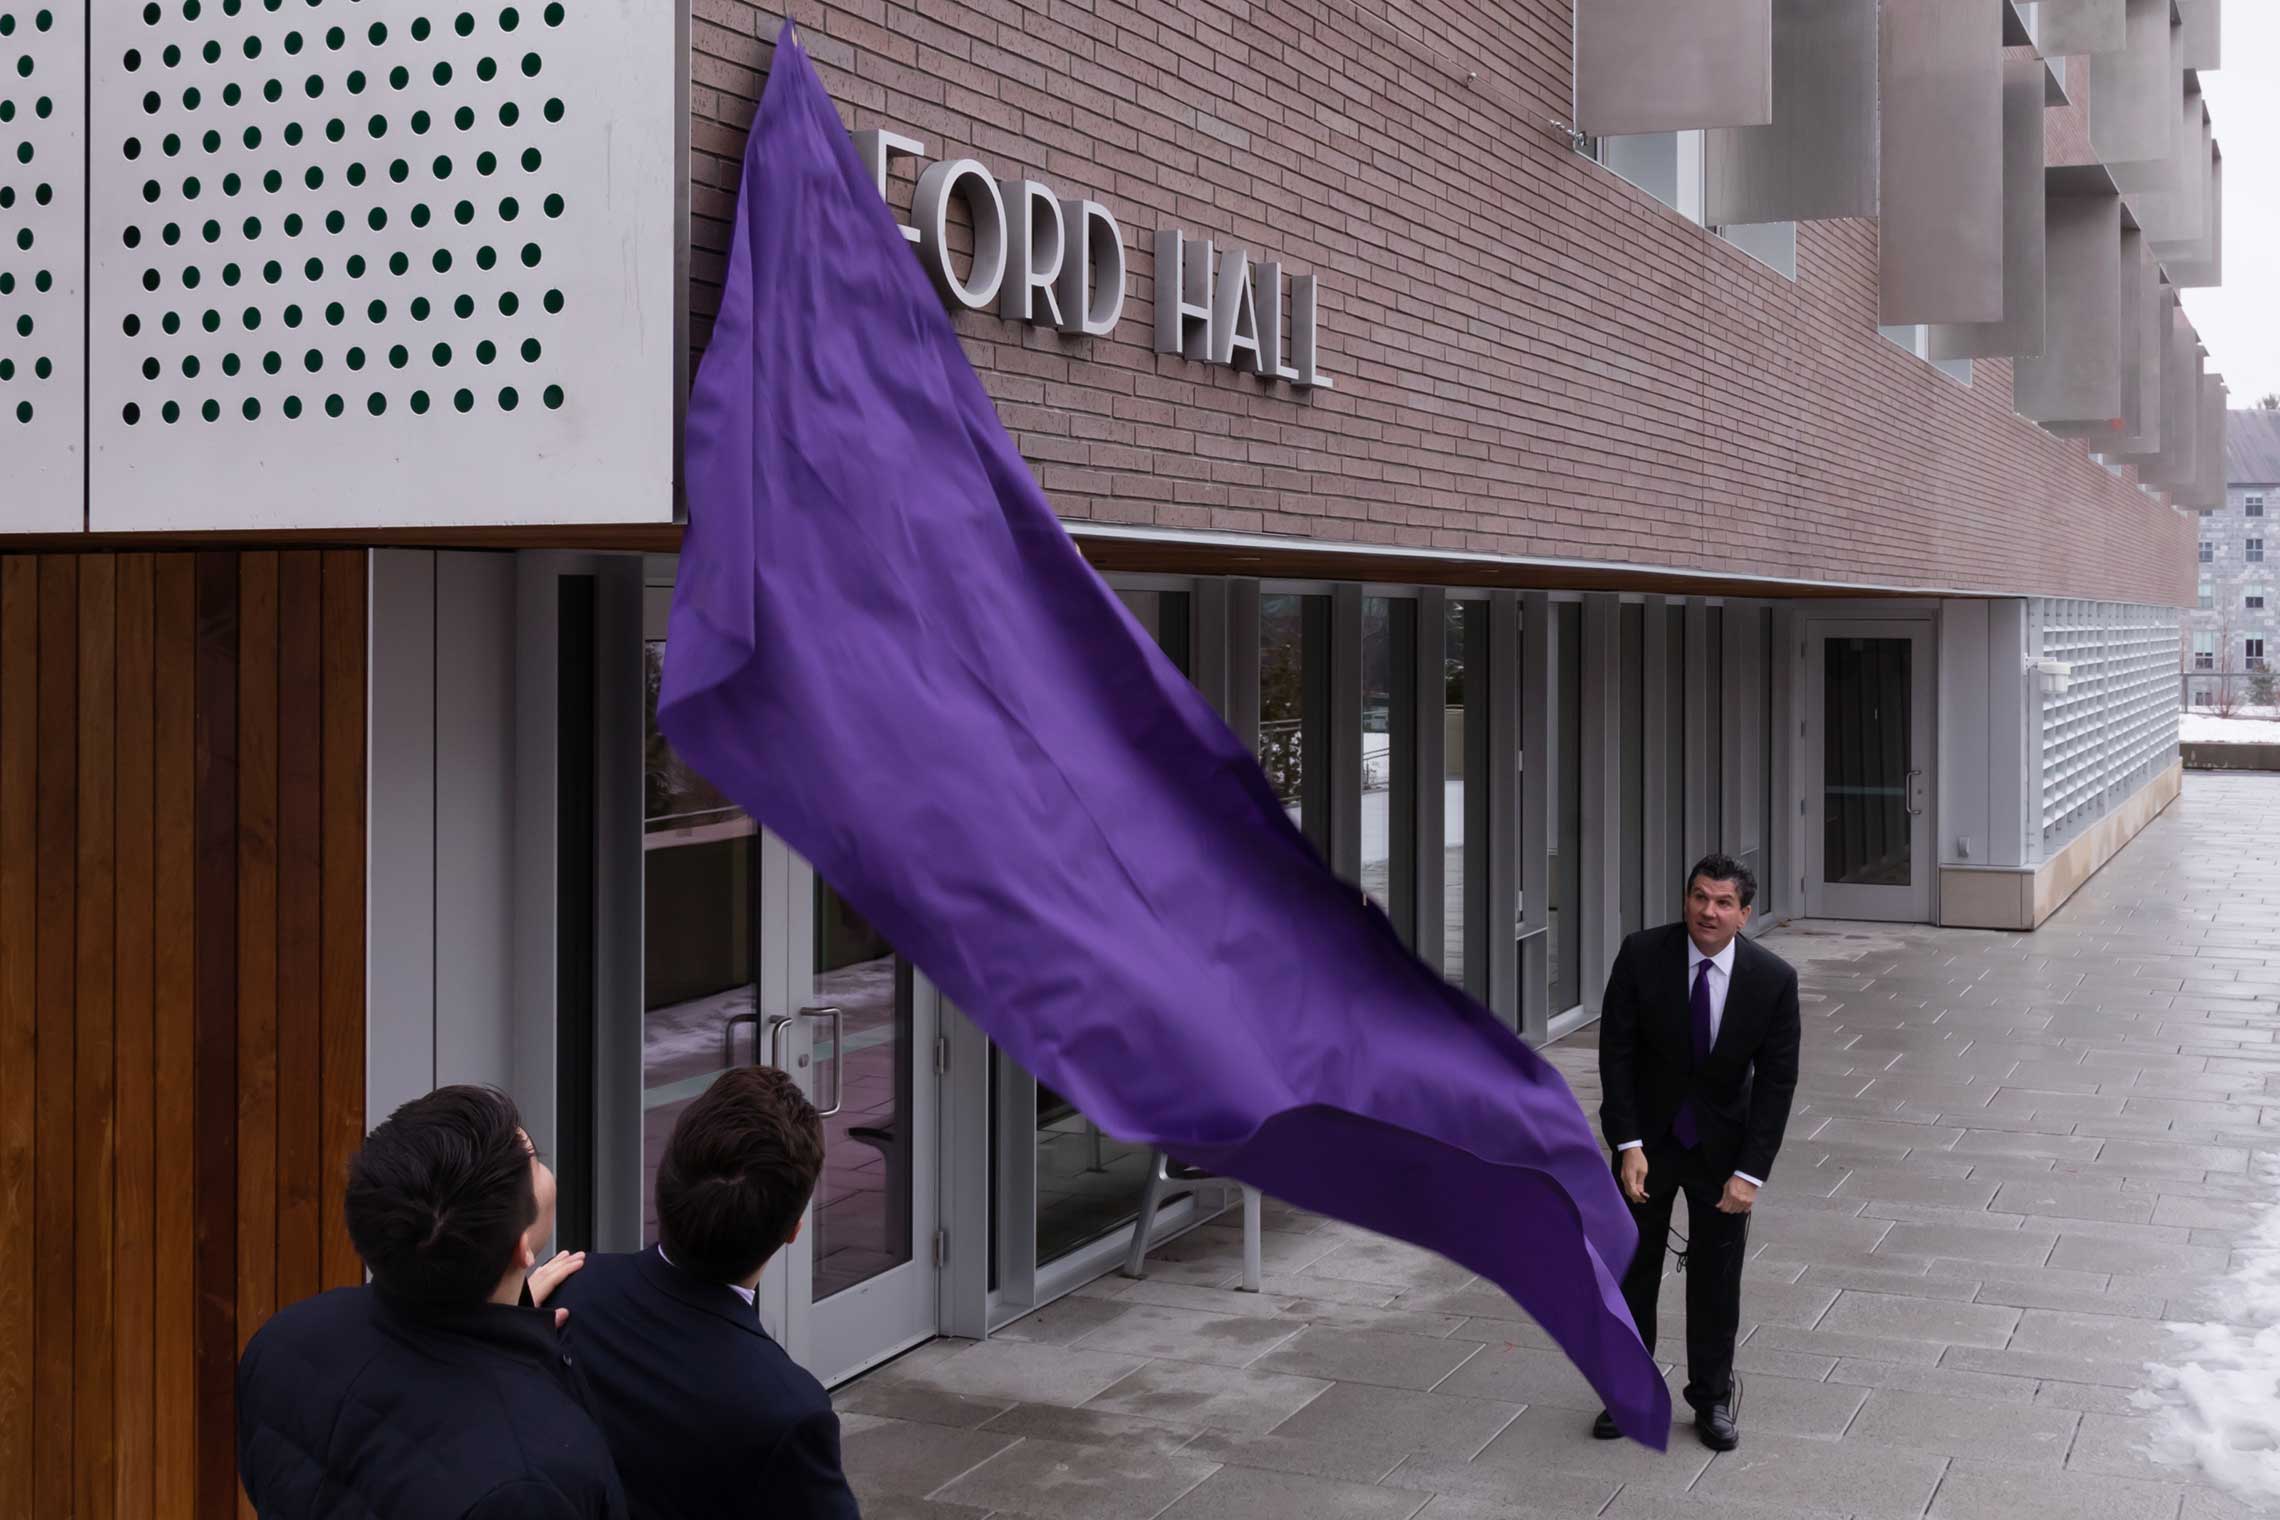 The dedication of Ford Hall